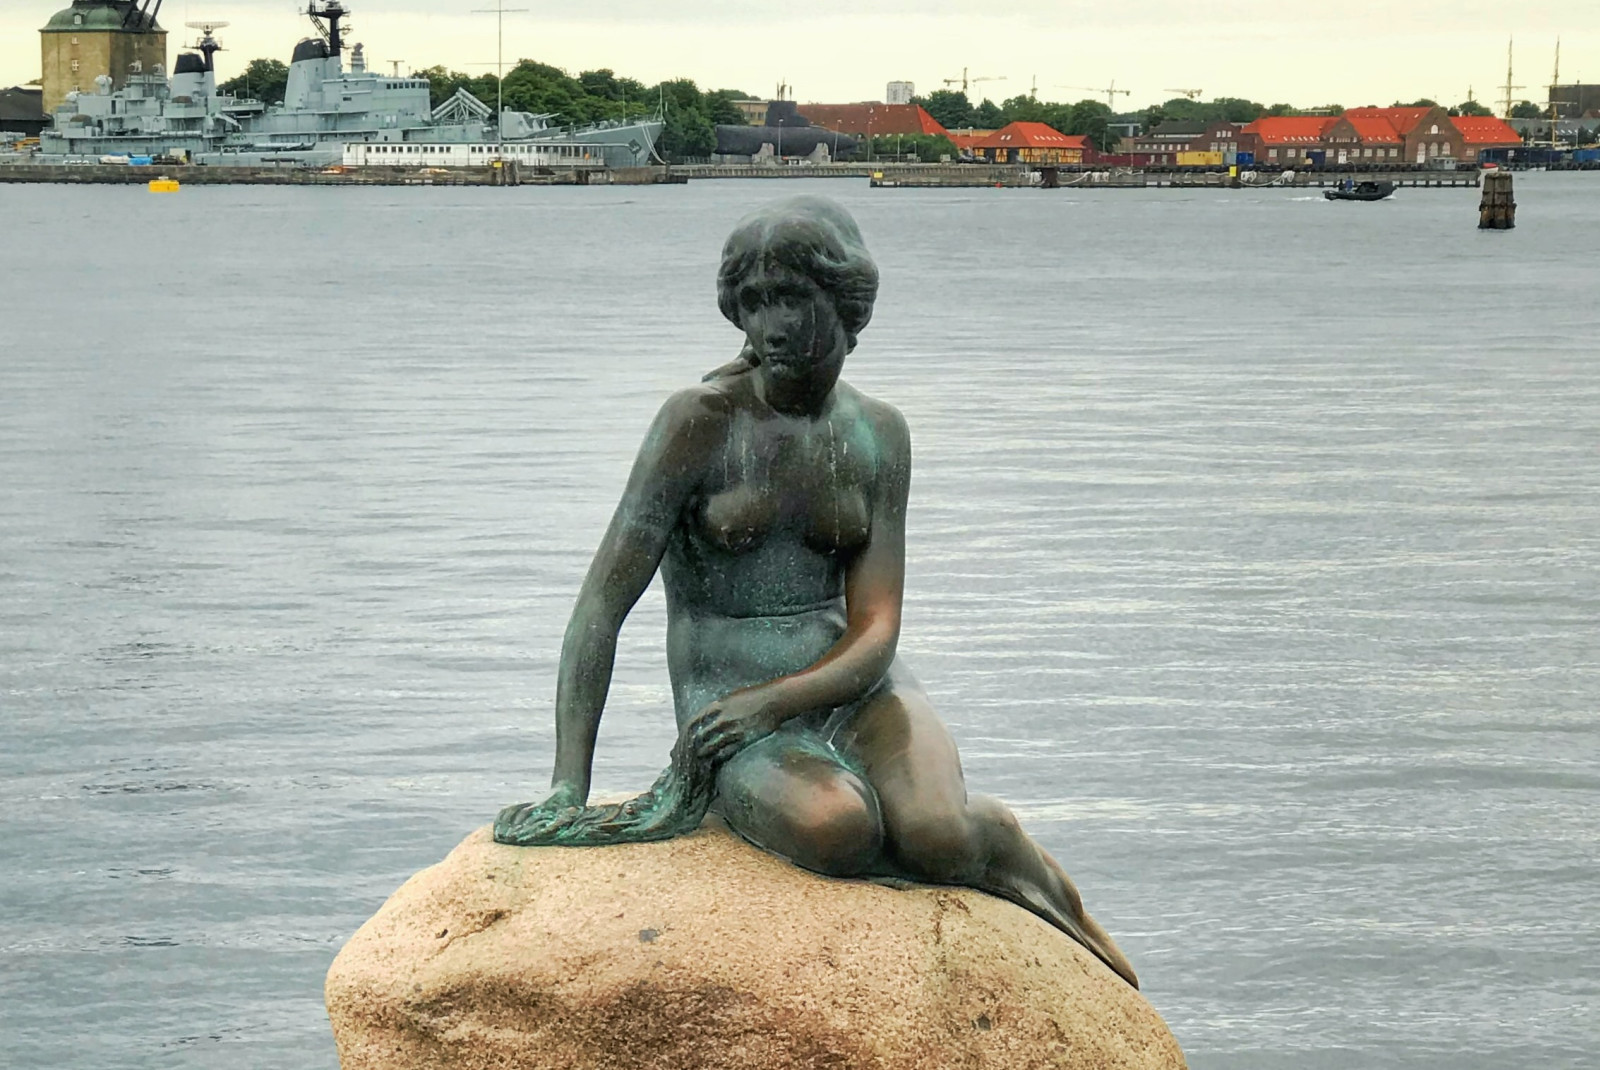 Statue on rock next to body of water during daytime